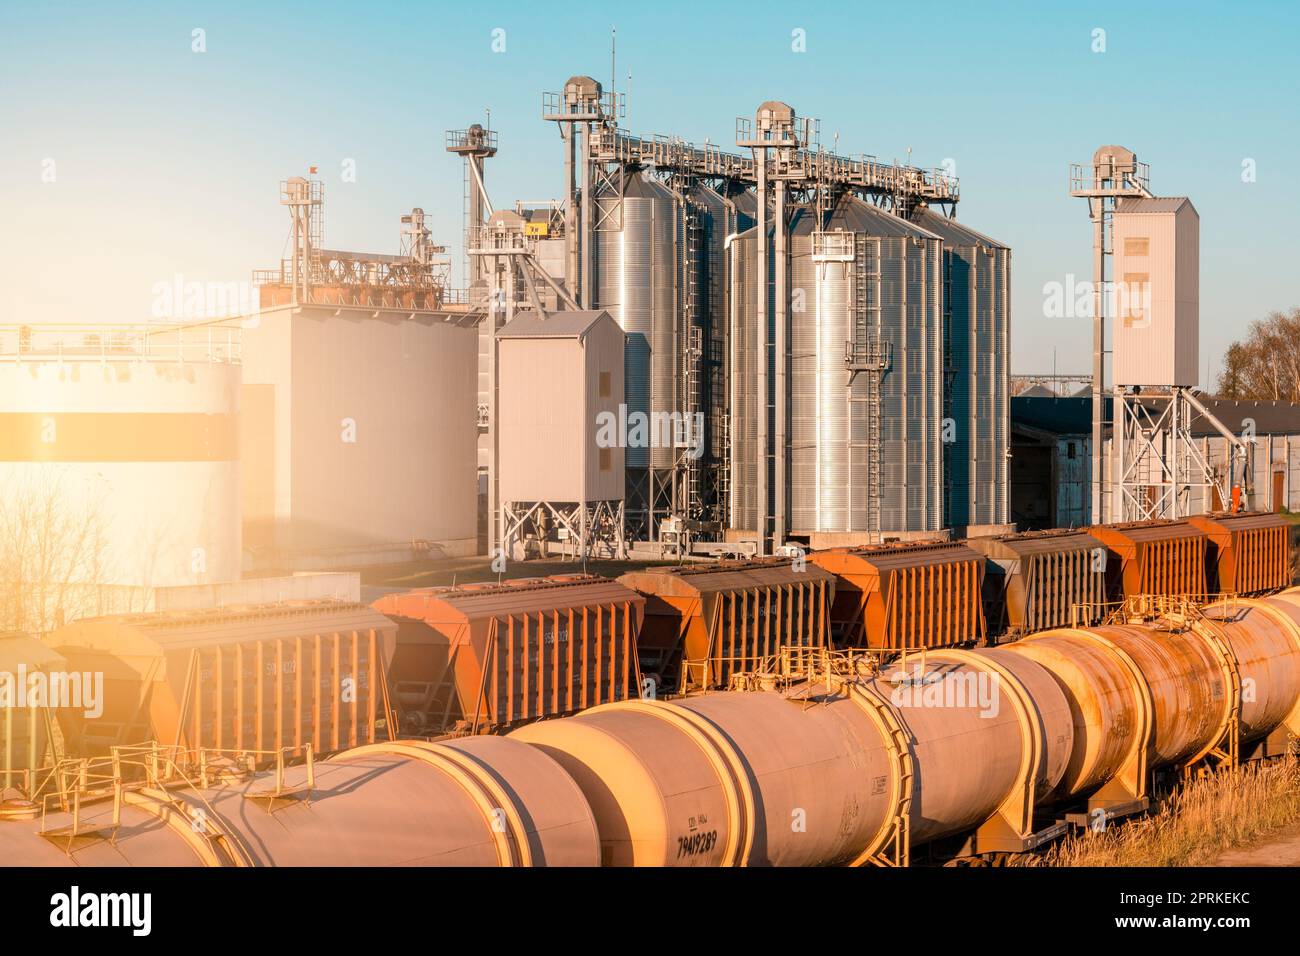 Trains shipping grain and fuel oil.Transportation and industrial concept. Stock Photo